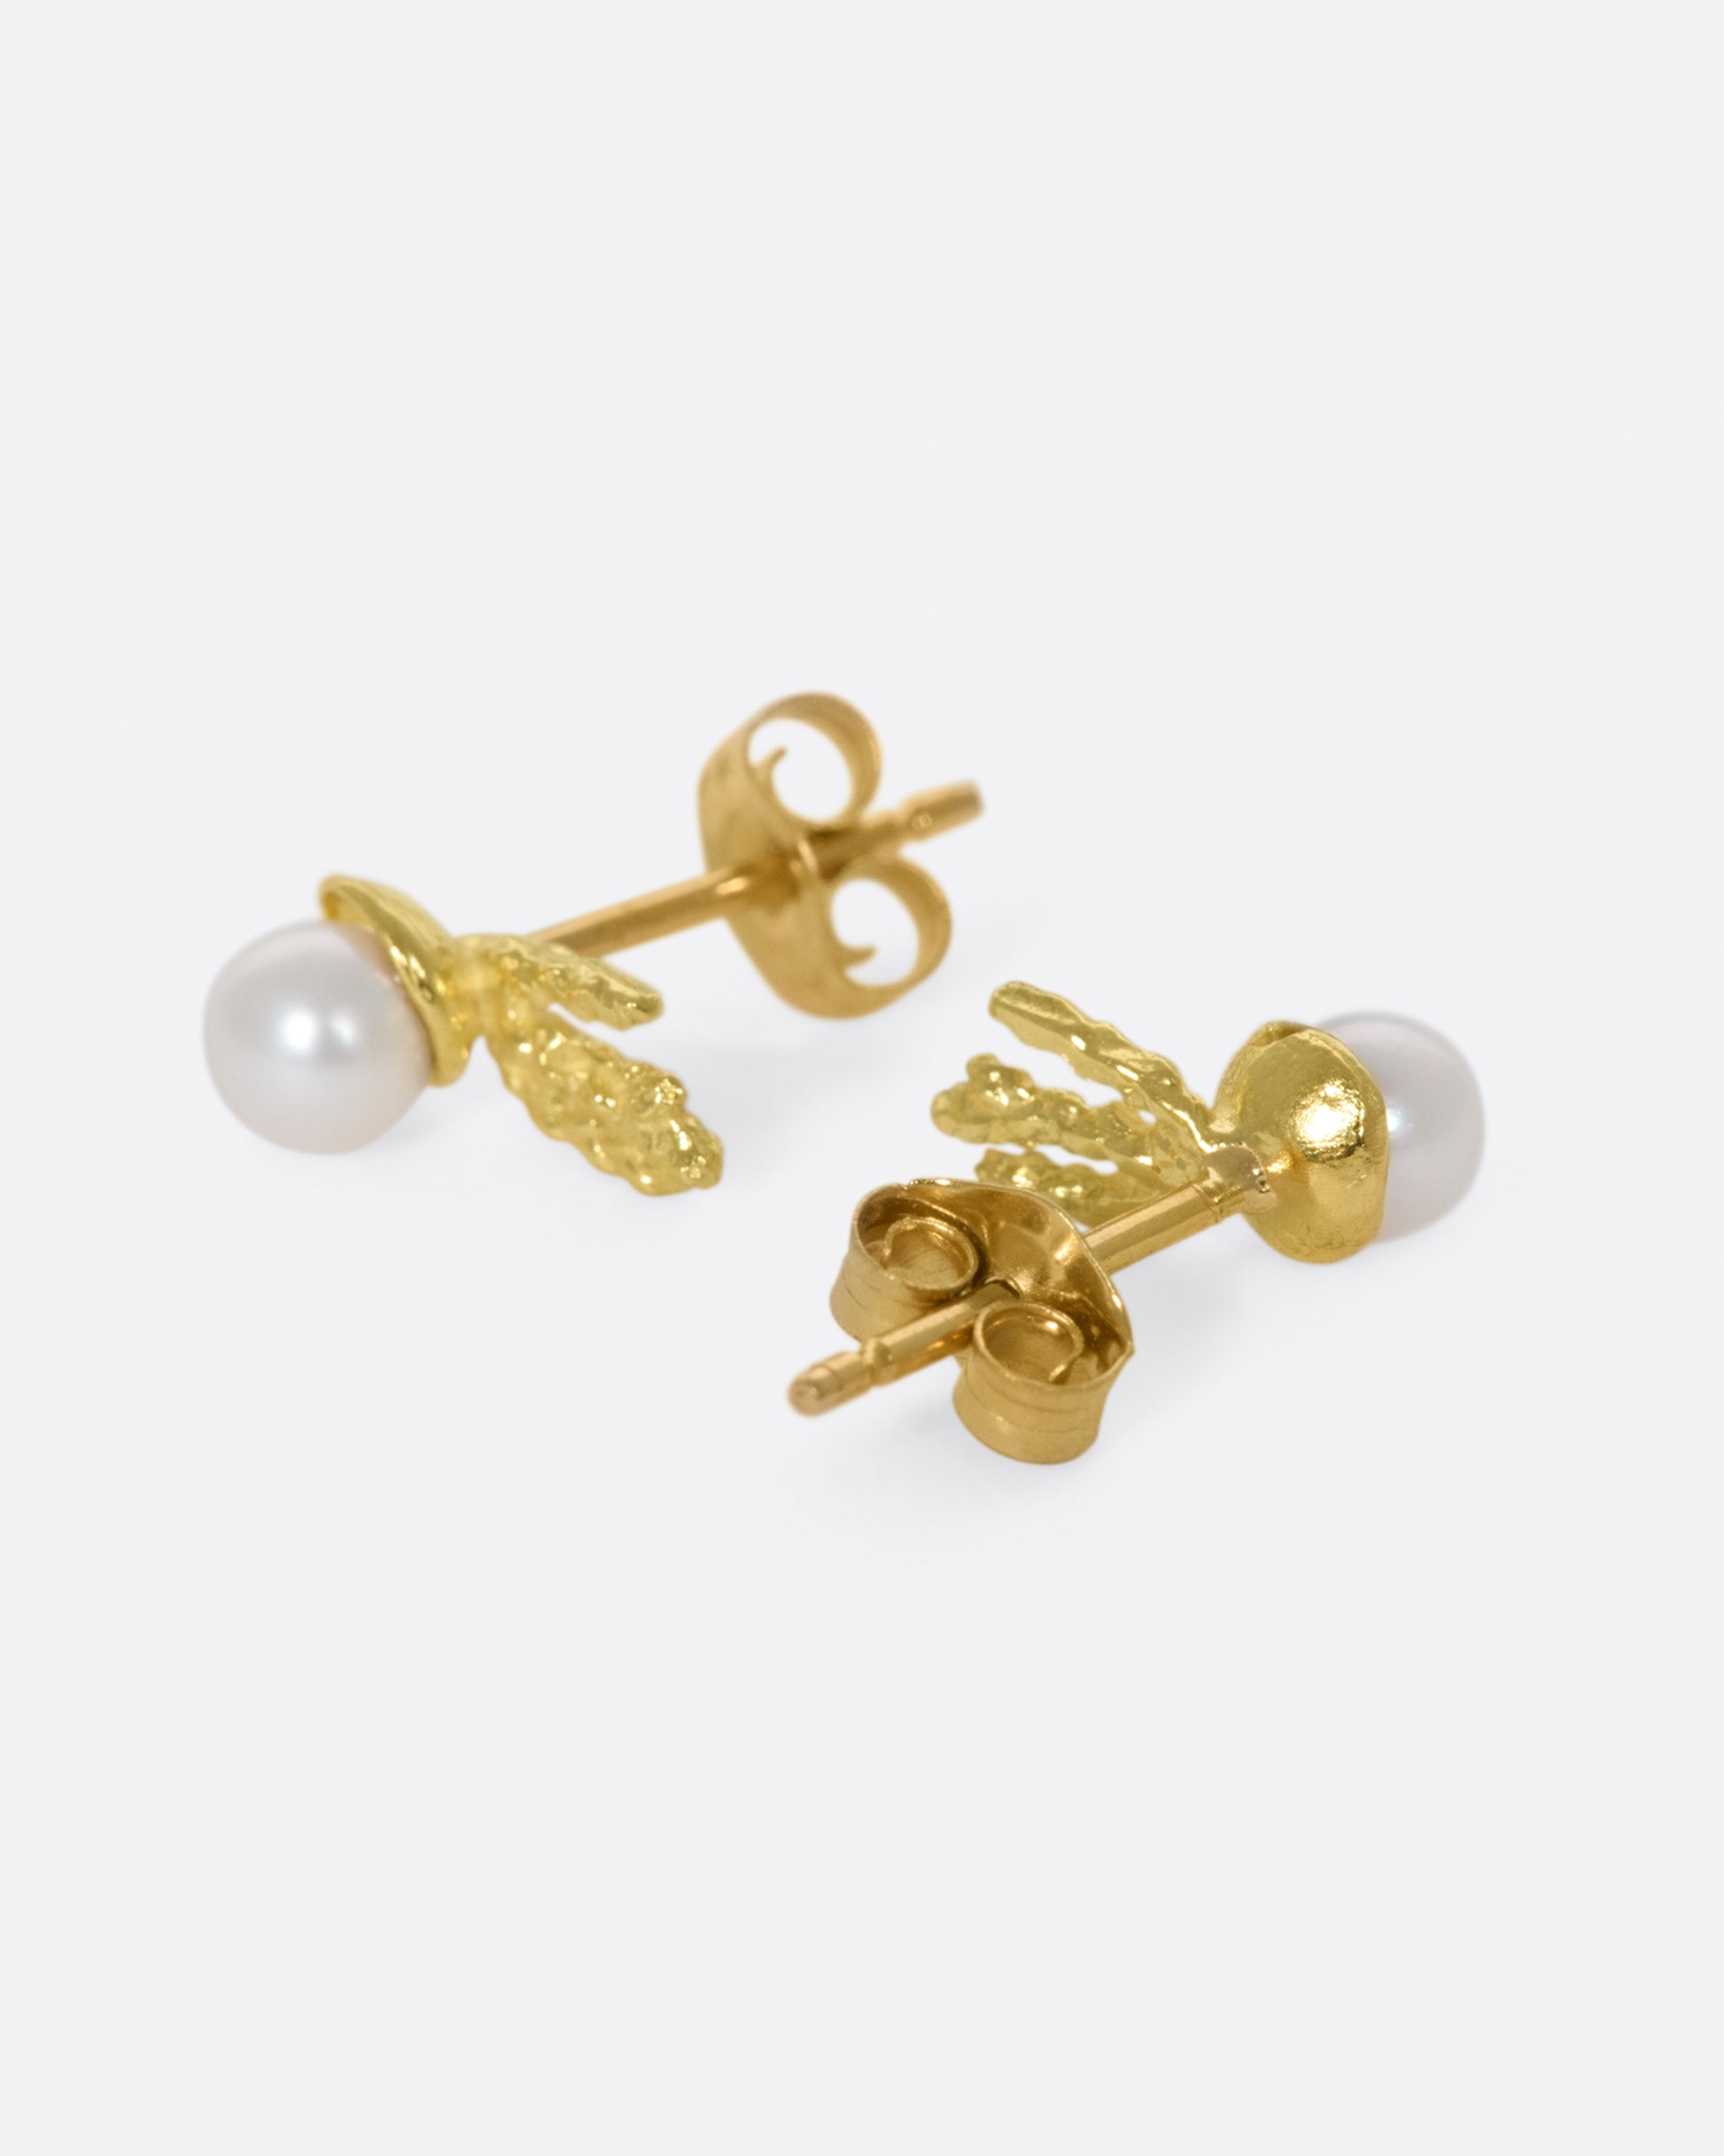 A pair of comet-like studs with Akoya pearls and gold trails.